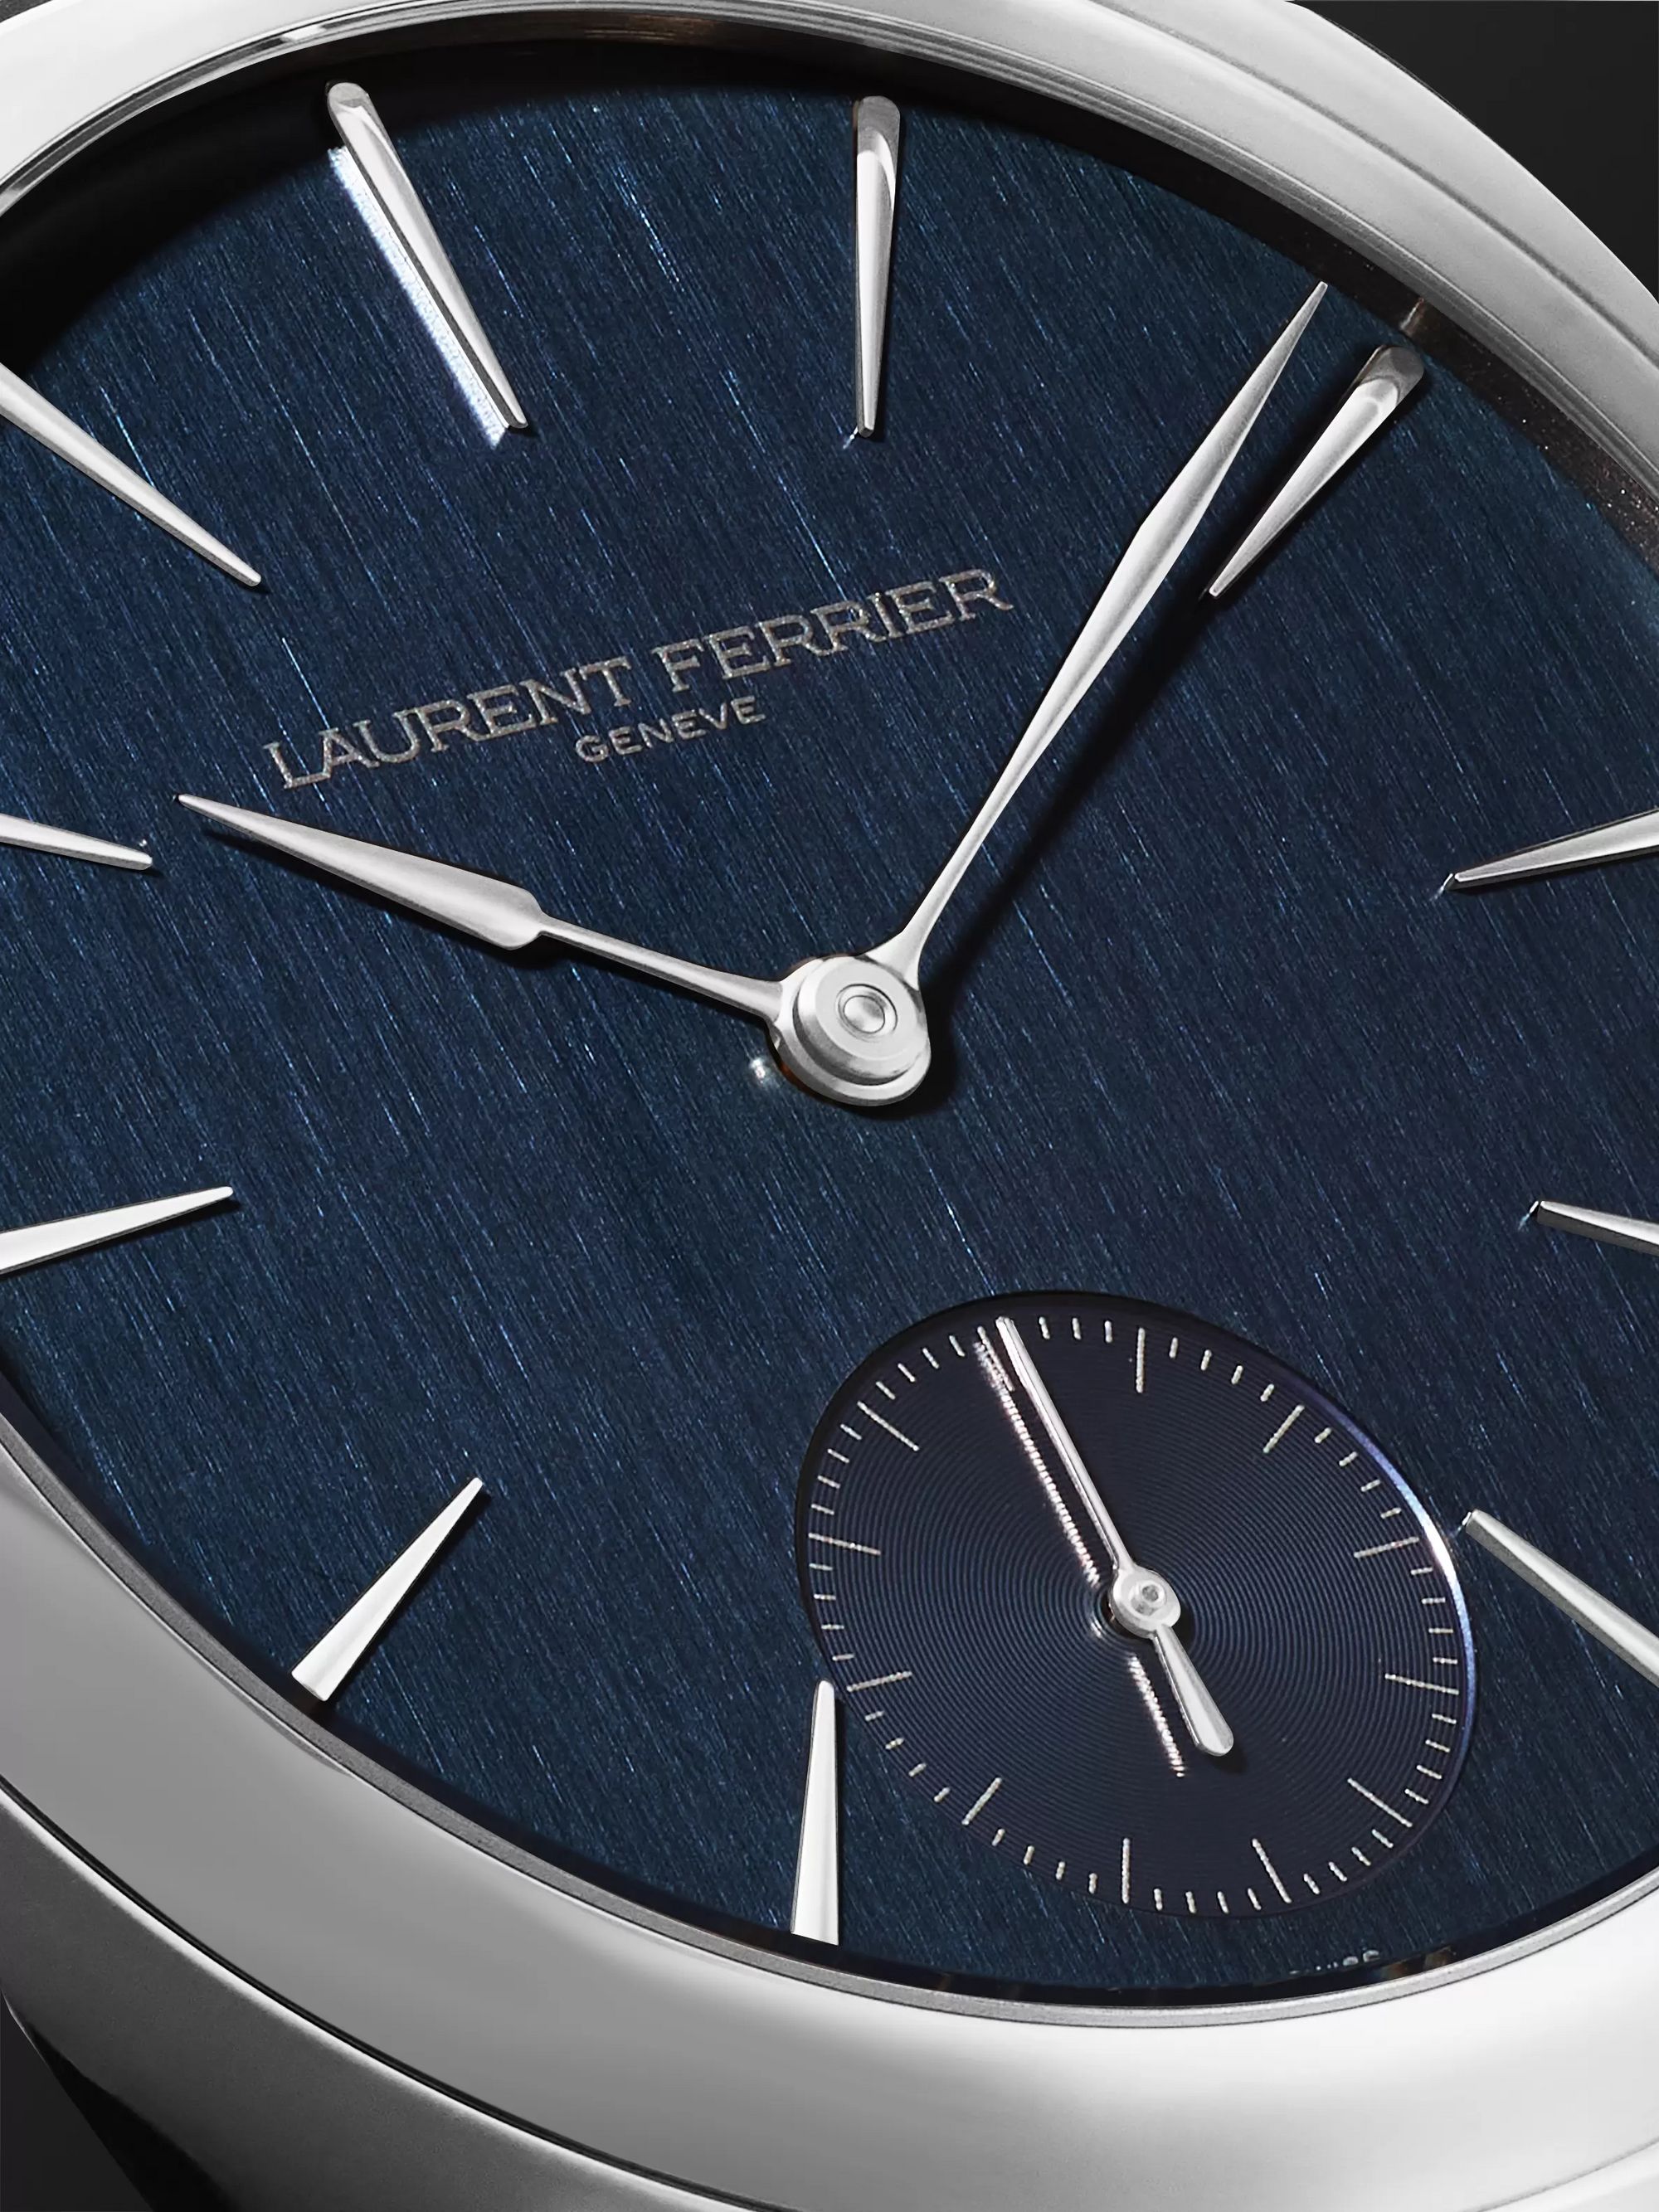 LAURENT FERRIER Square Automatic 41mm Stainless Steel and Leather Watch, Ref. No. LCF013.AC.CG2.1